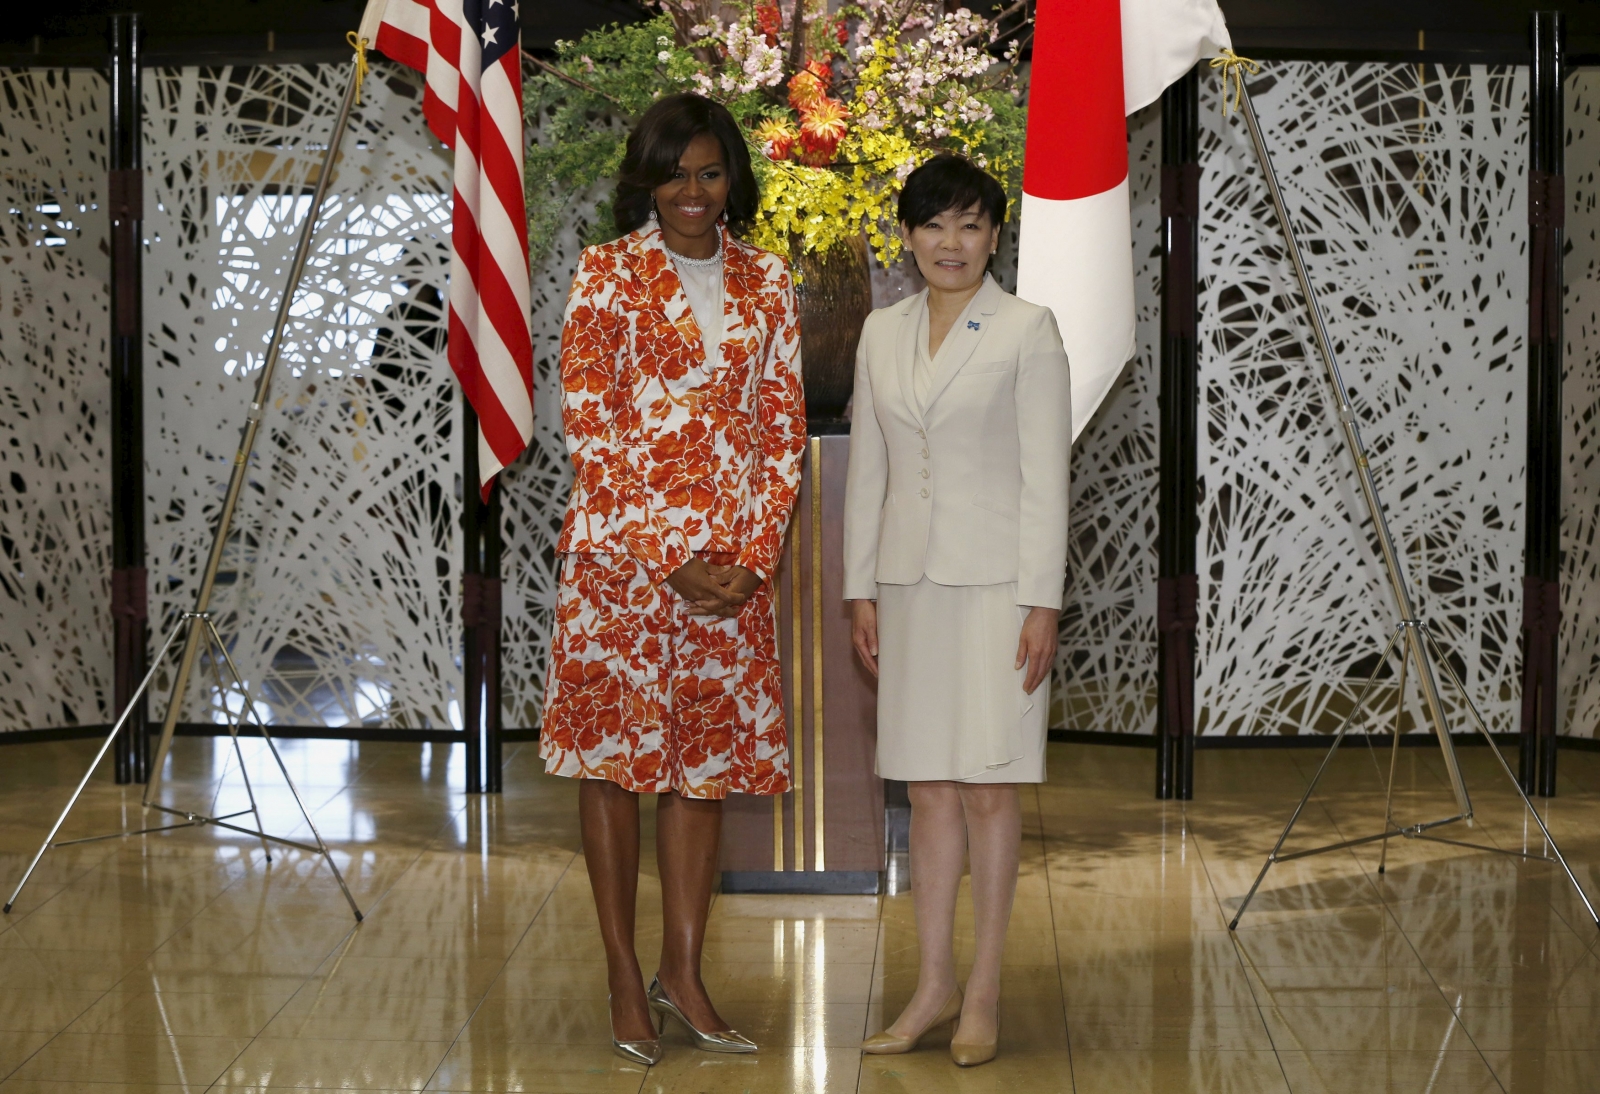 Michelle Obama pushes for girls' education in Japan